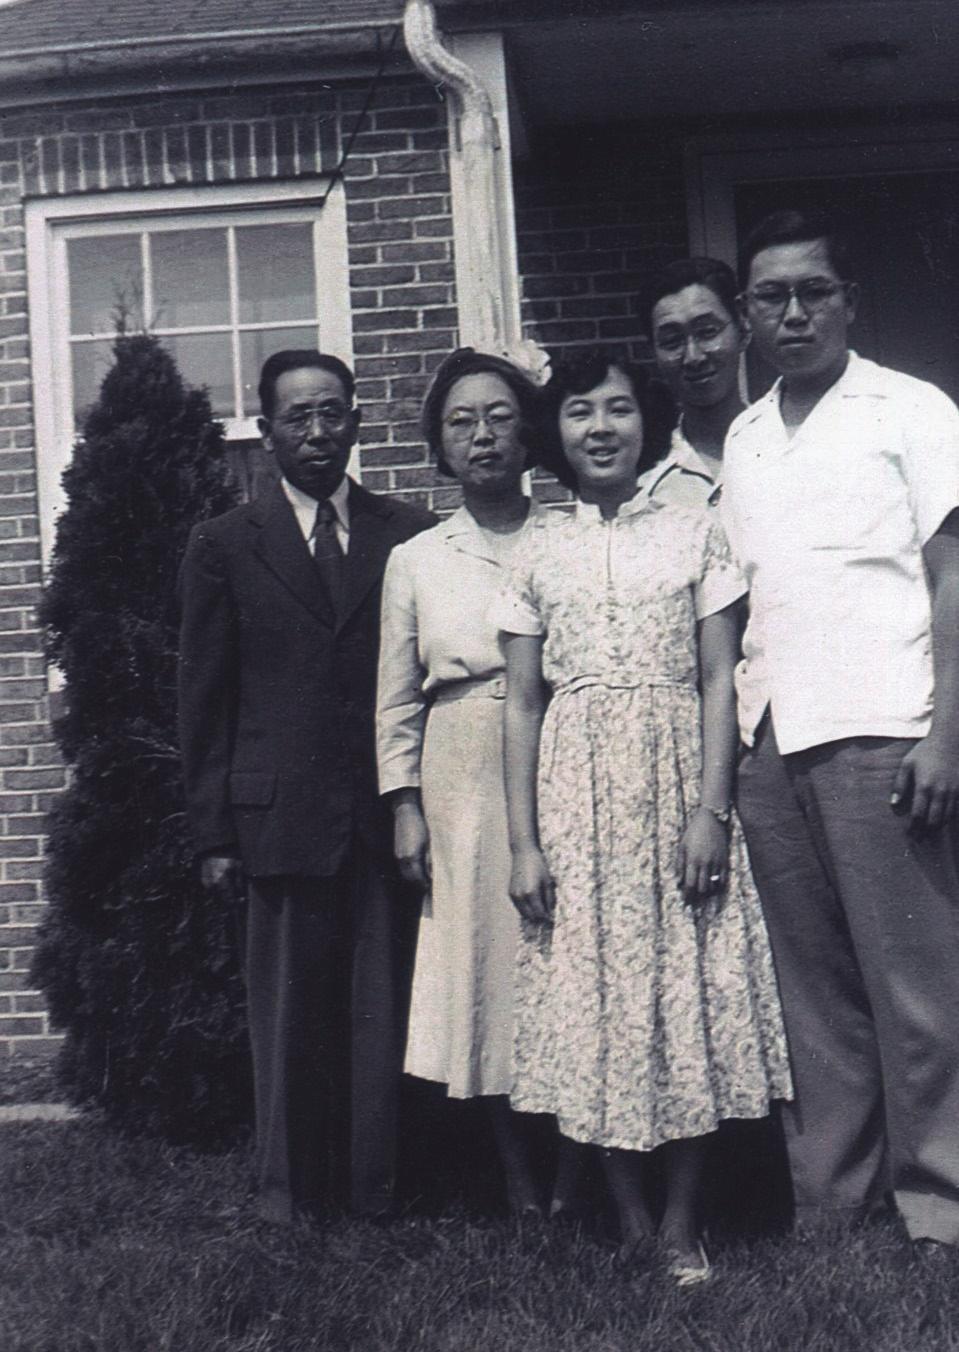 The Sakimura Family A fter losing their home and flower shop in California during the second World War, the Sakimura family was invited to Messiah College by President C.N.